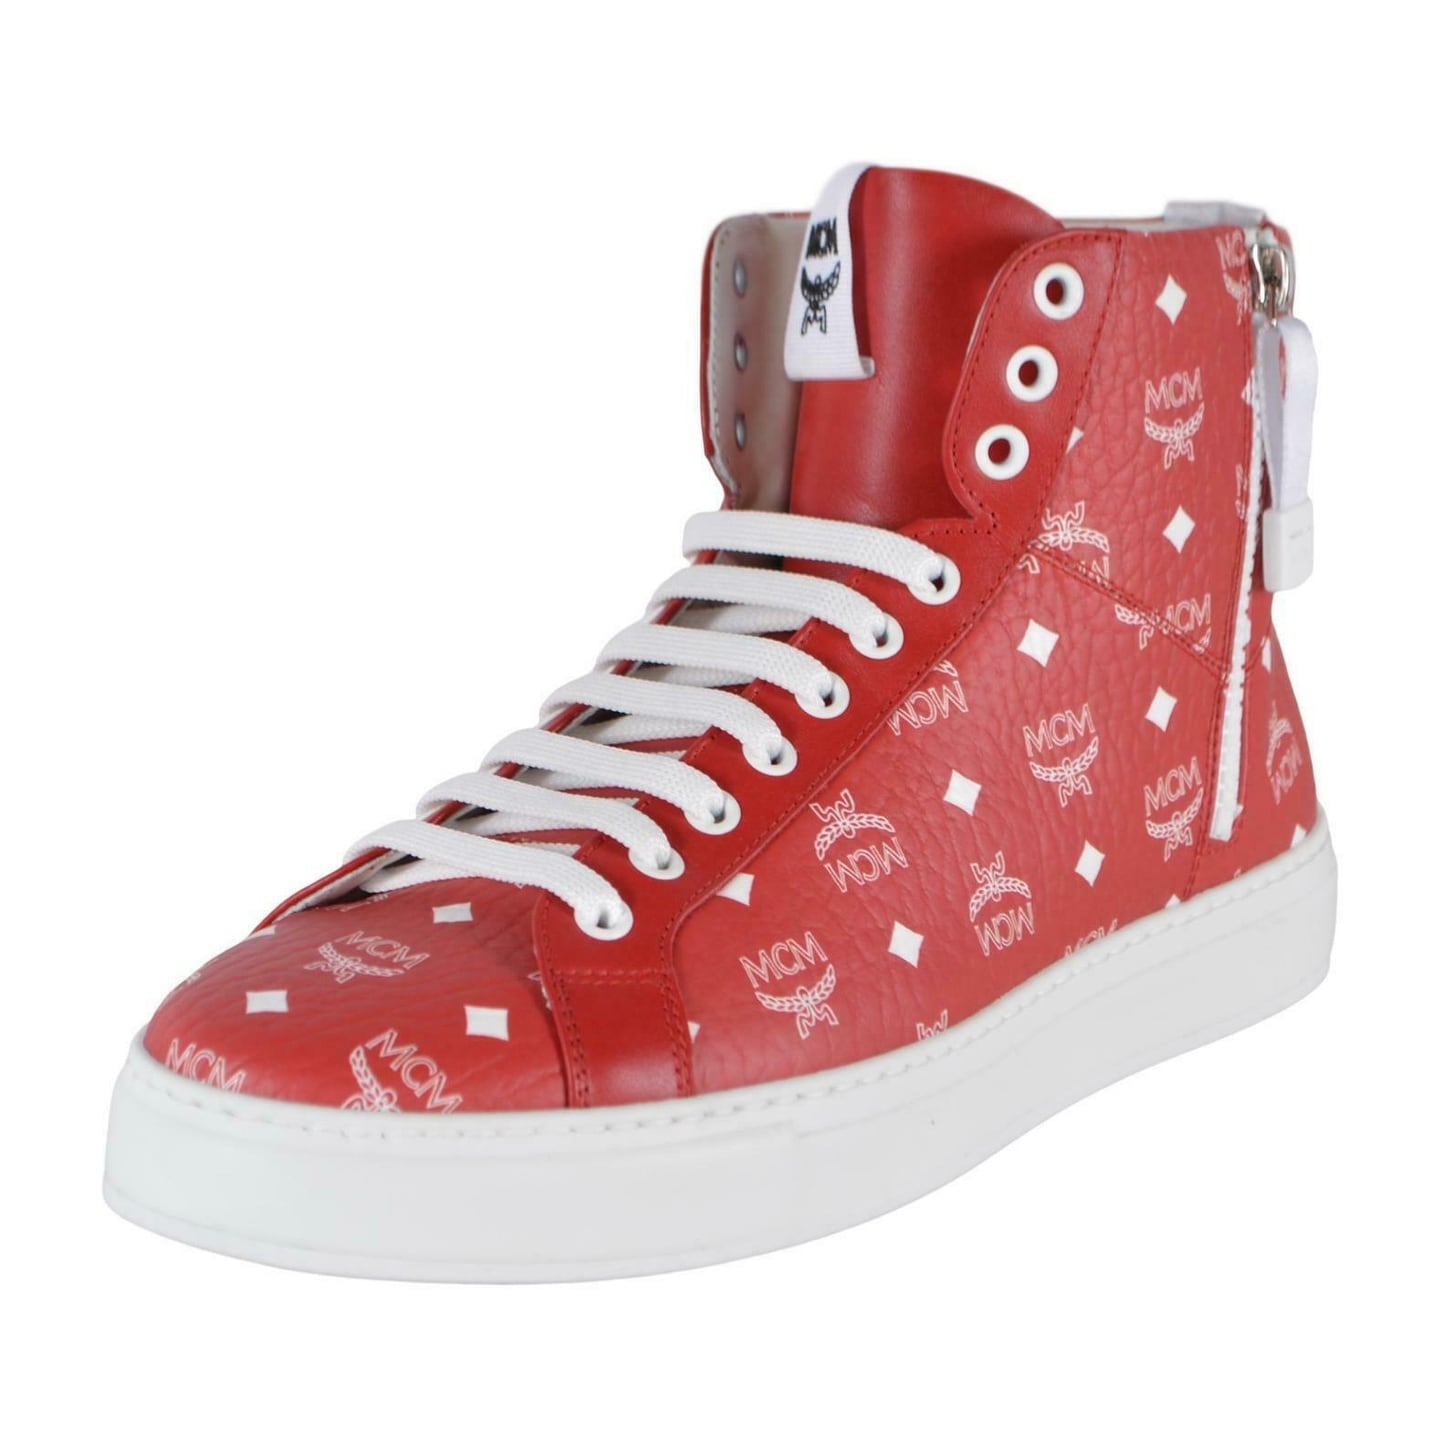 MCM Men's Red White Coated Canvas 